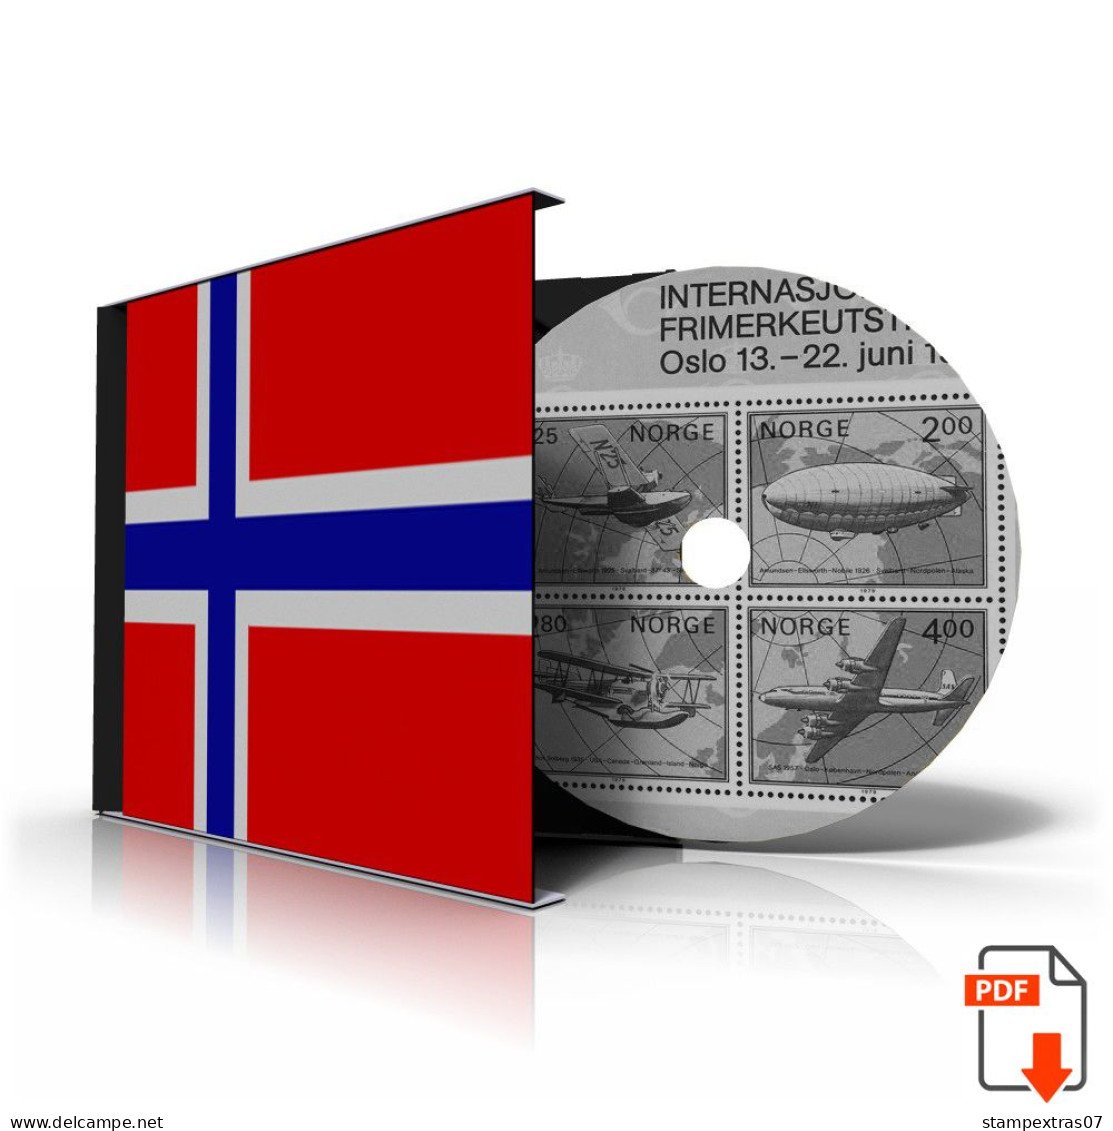 NORWAY 1855-2010 STAMP ALBUM PAGES (183 B&w Illustrated Pages) - Inglés